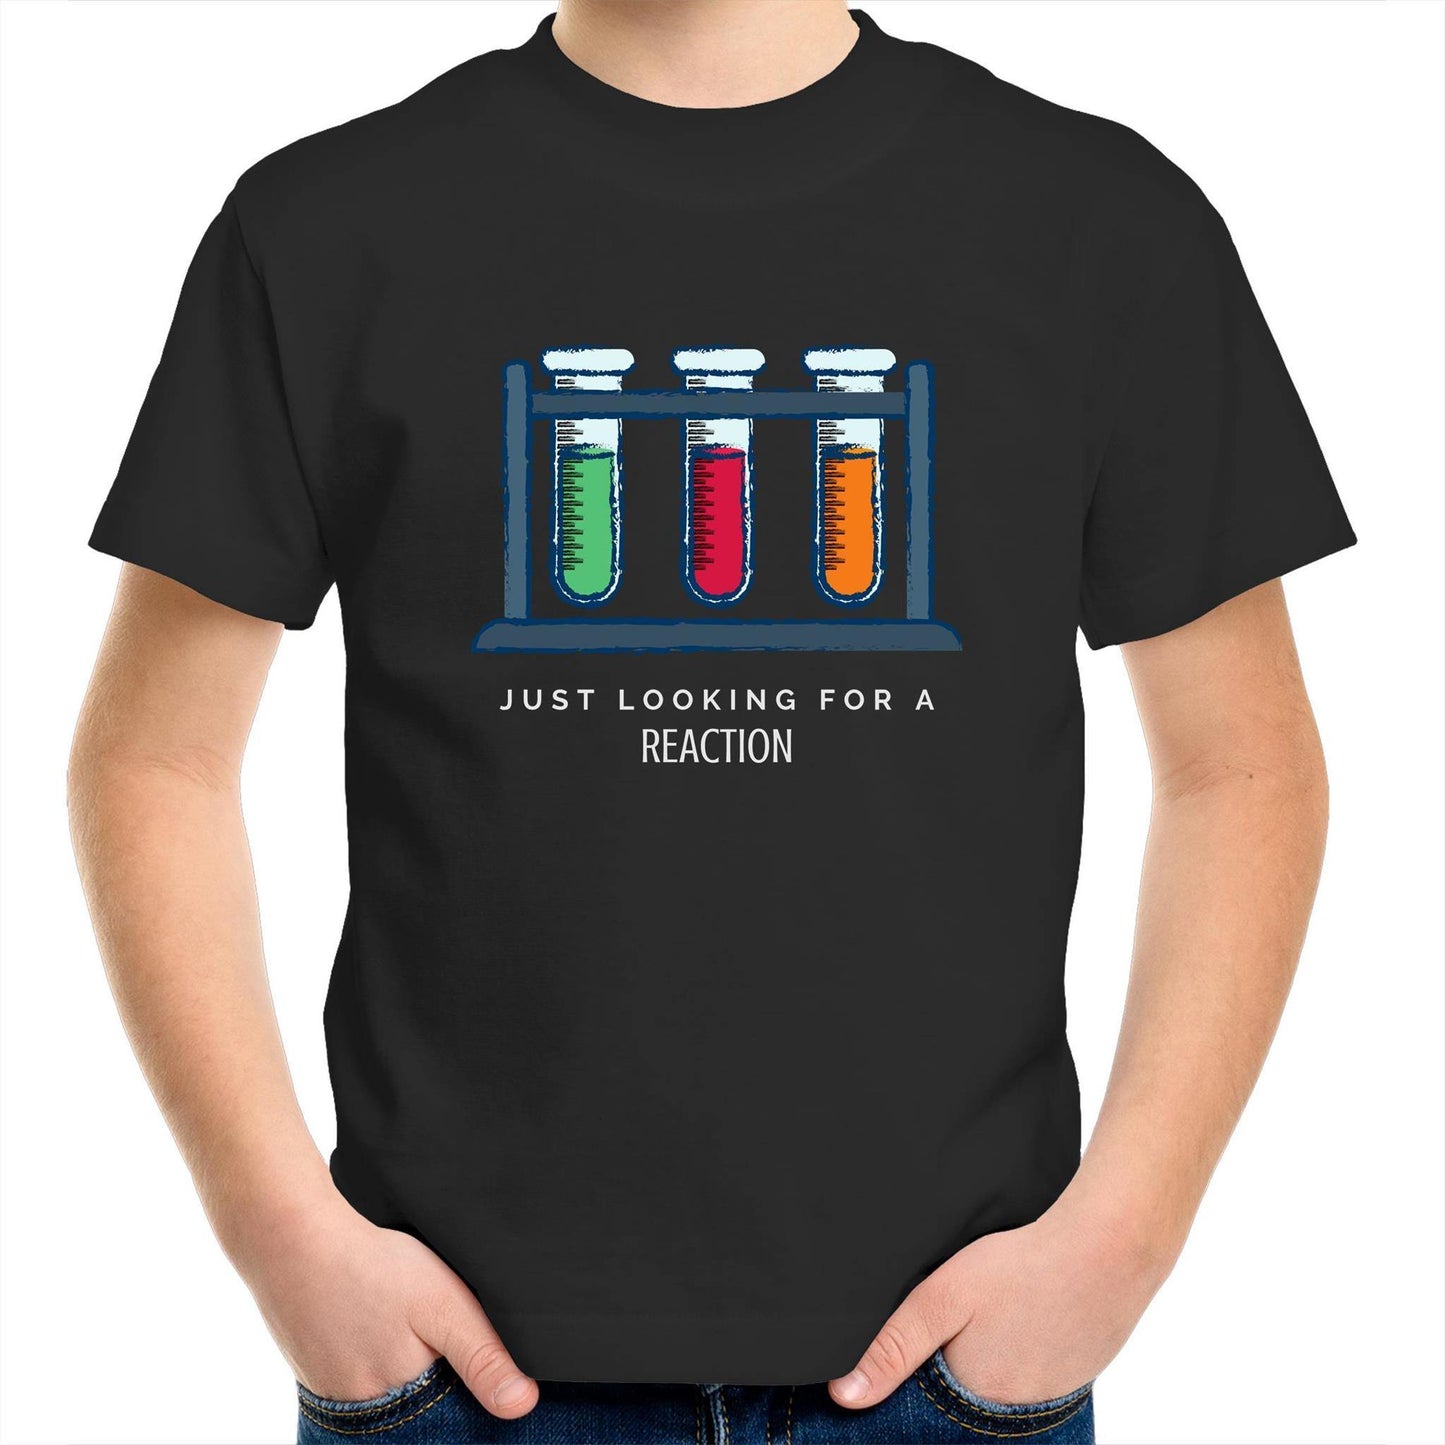 Test Tube, Just Looking For A Reaction - Kids Youth Crew T-Shirt Black Kids Youth T-shirt Science